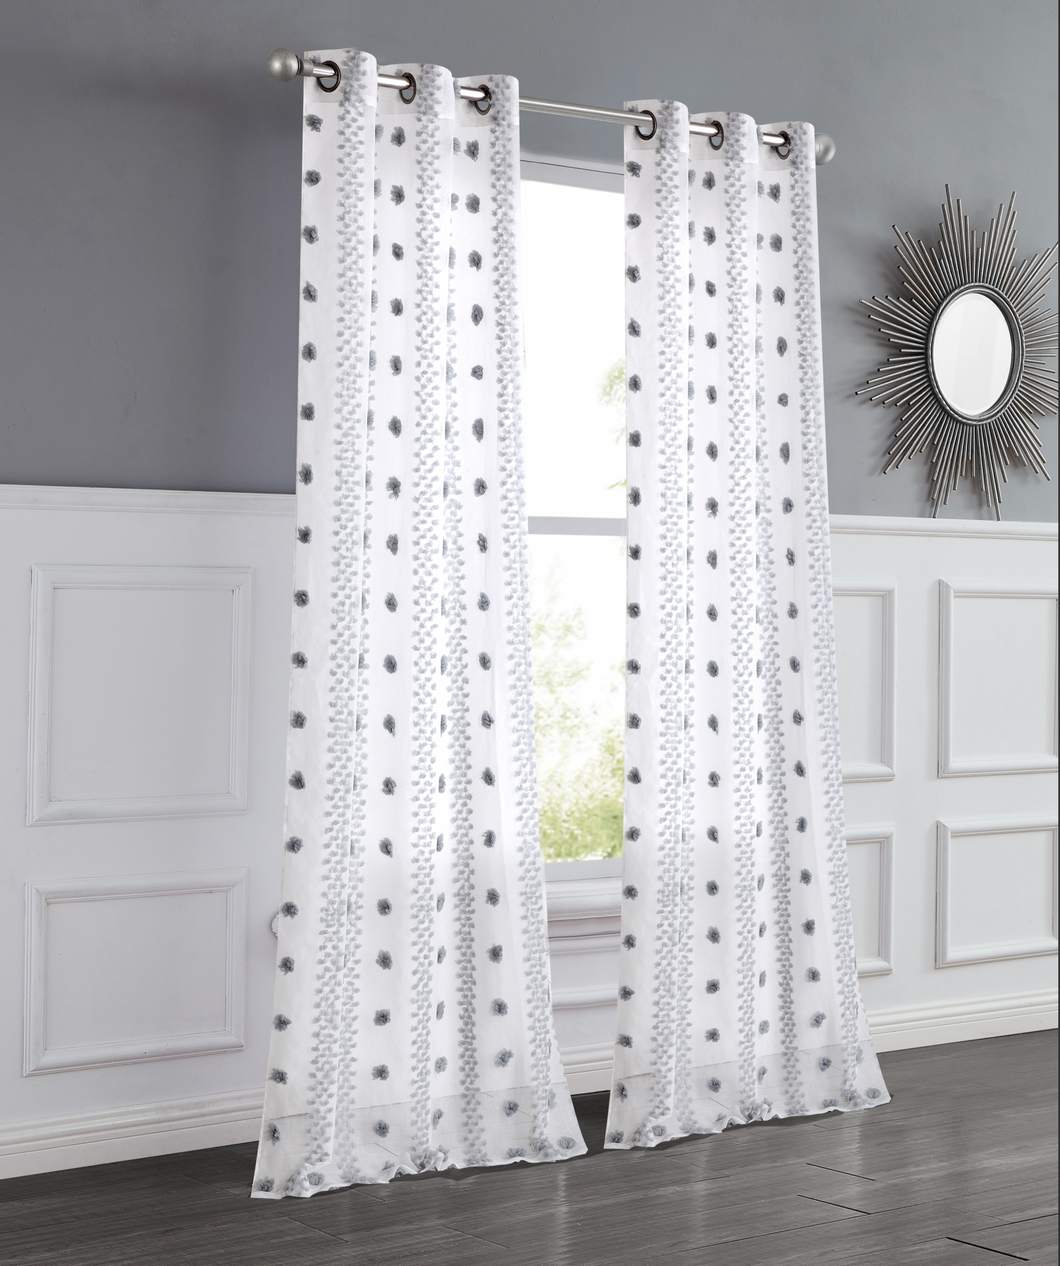 Dainty Home Cloud Linen Look Light Filtering Grommet Panel Pair With 3D Cotton Like Cloud Puffs